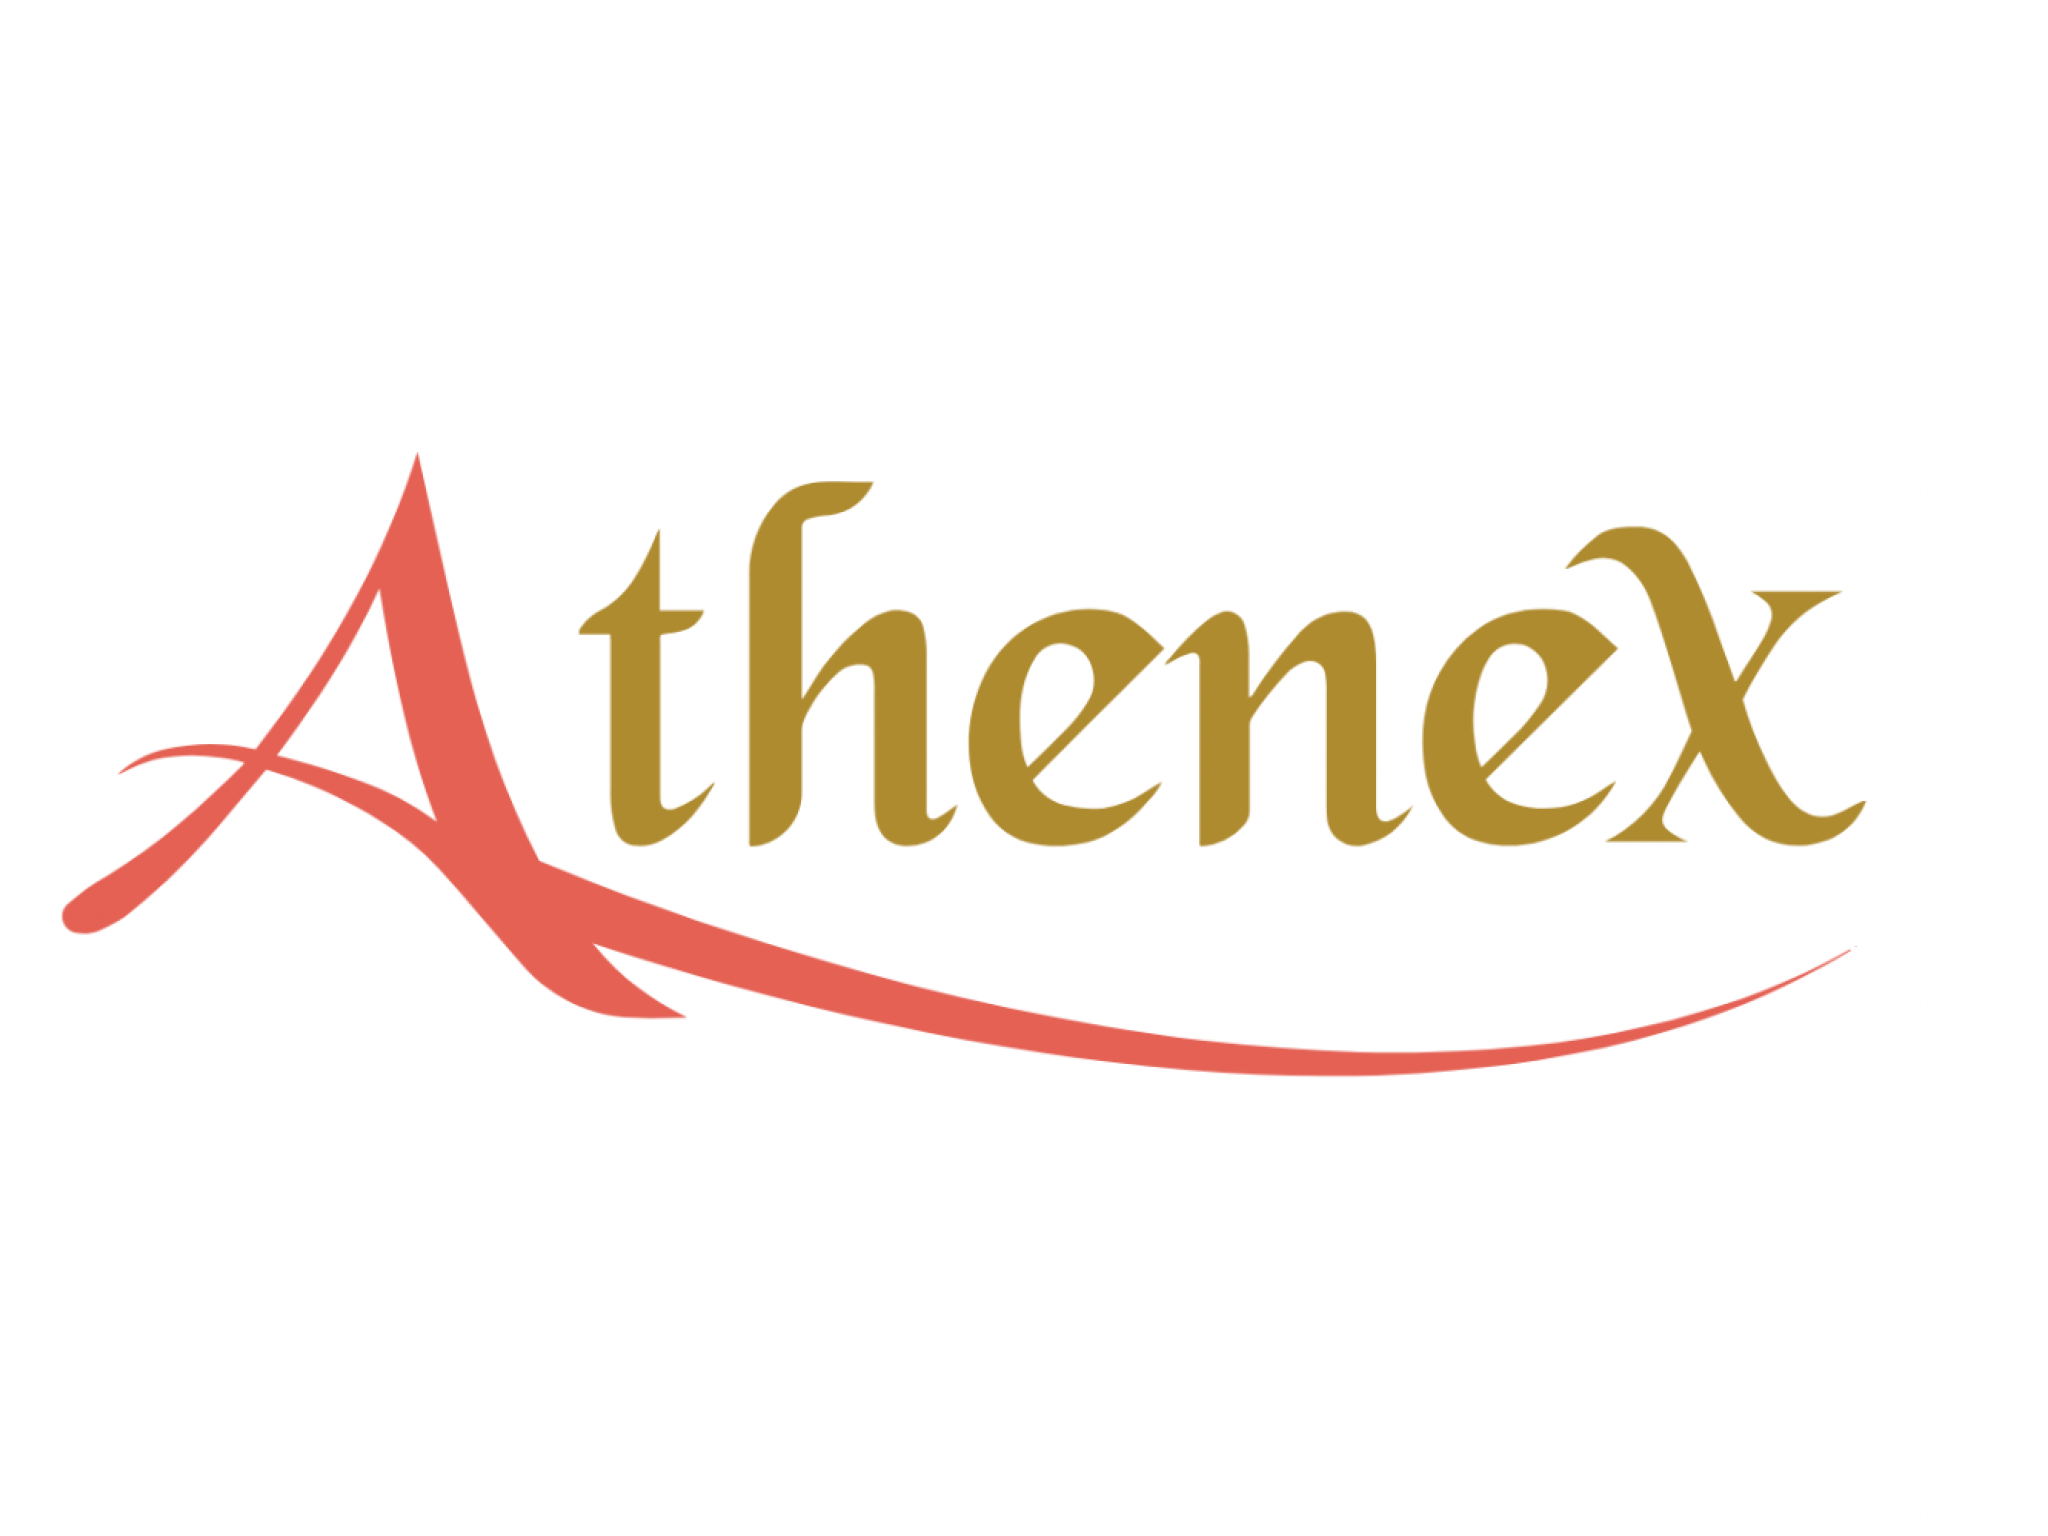  athenex-voluntarily-filed-for-chapter-11-proceedings-shares-plunge 